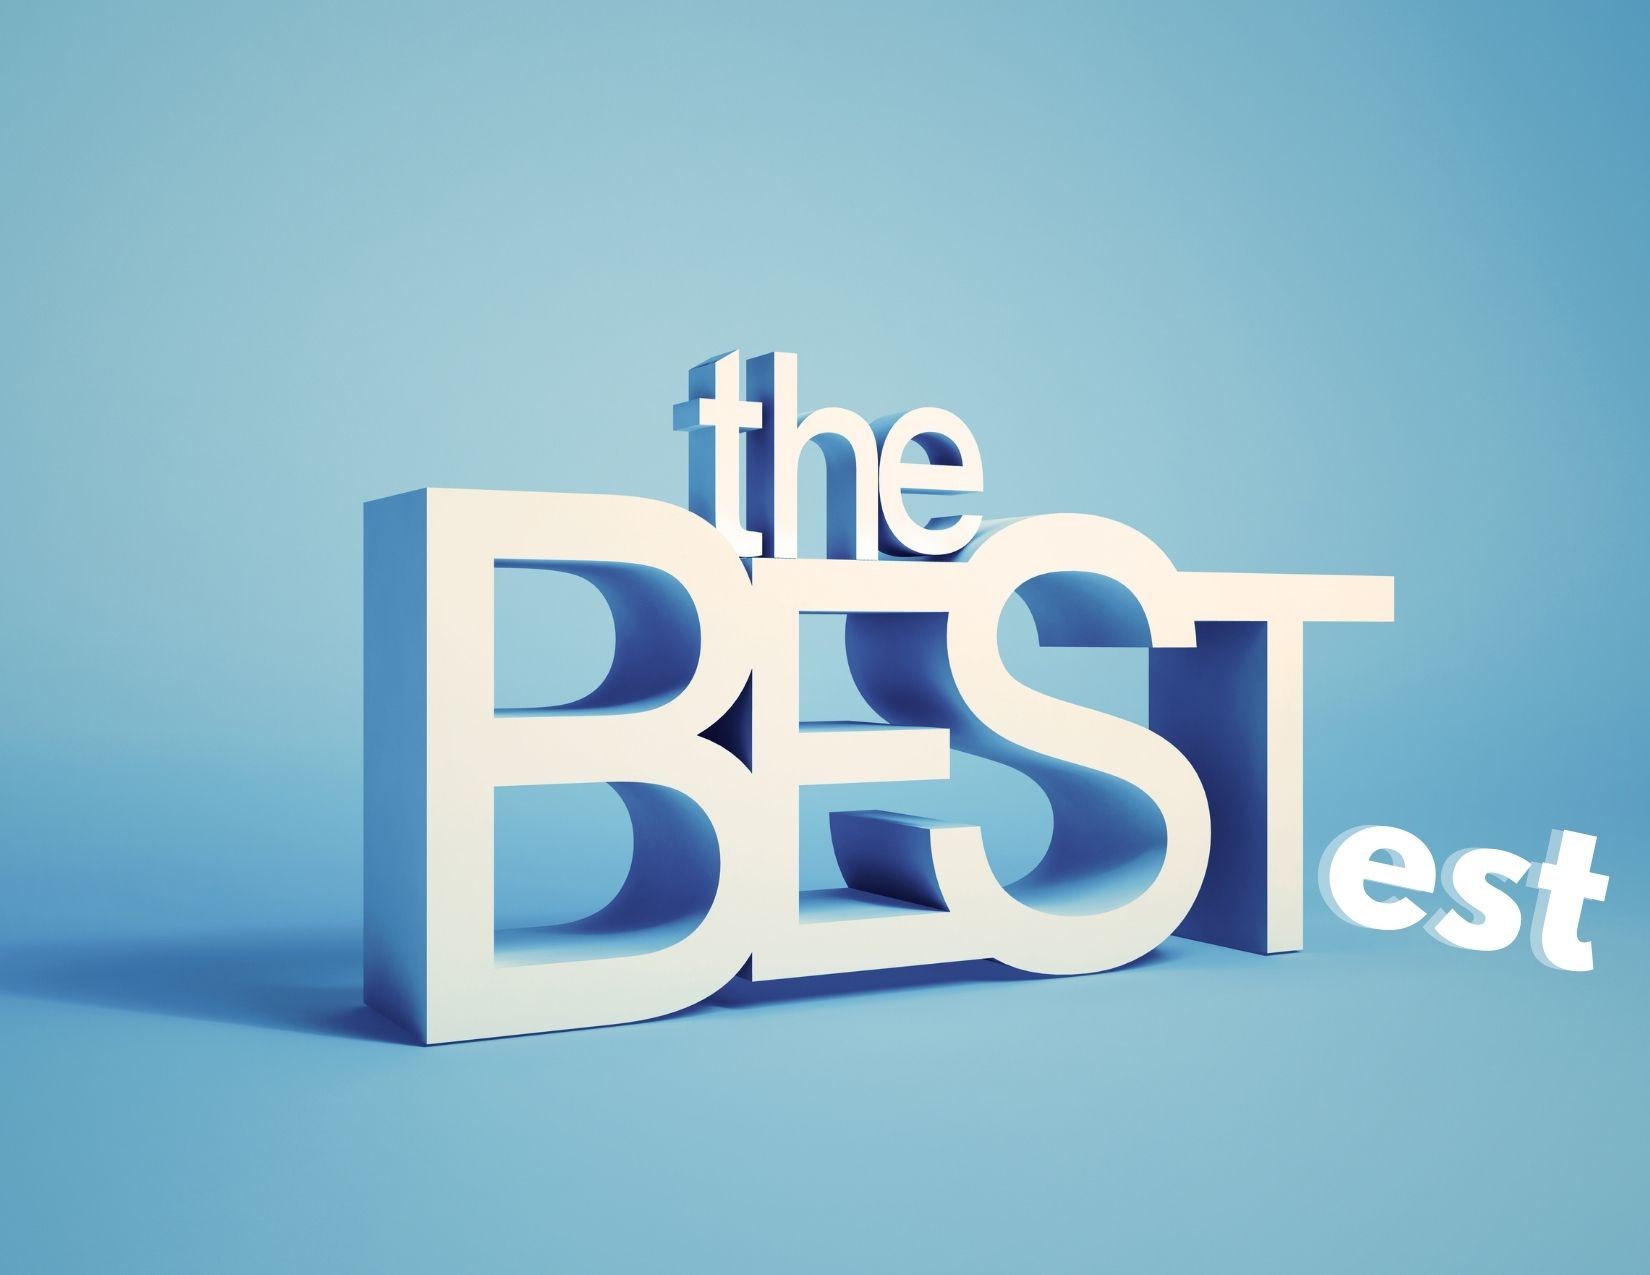 A graphic with the word Best and the letters est added to represent the questions "is bestest a word?"